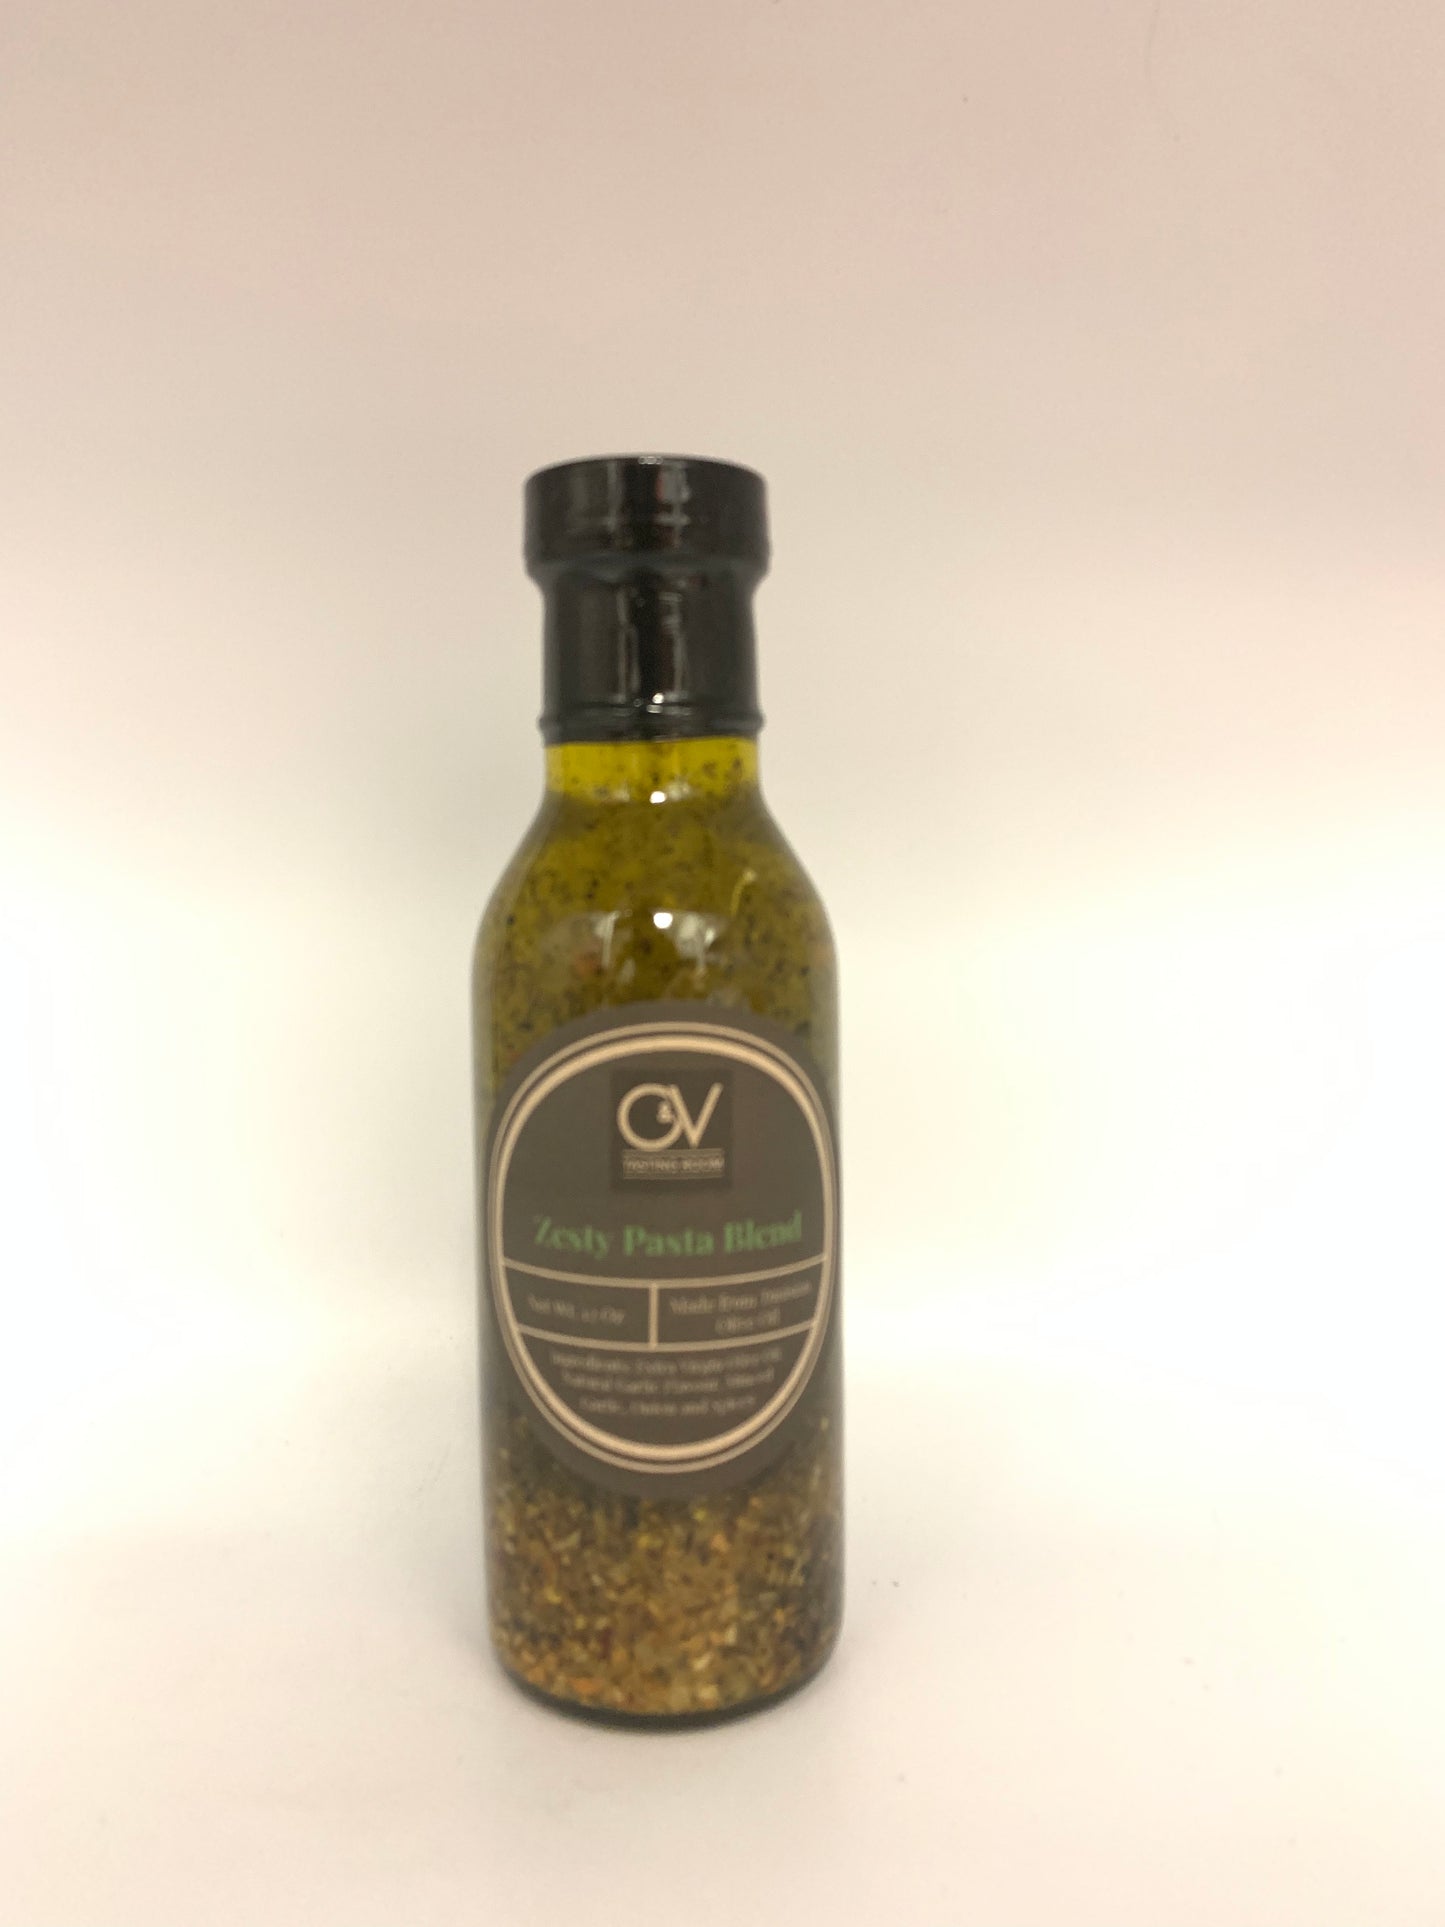 Zesty Italian Blend is amazing on pasta, bread dipping, salads and a marinade